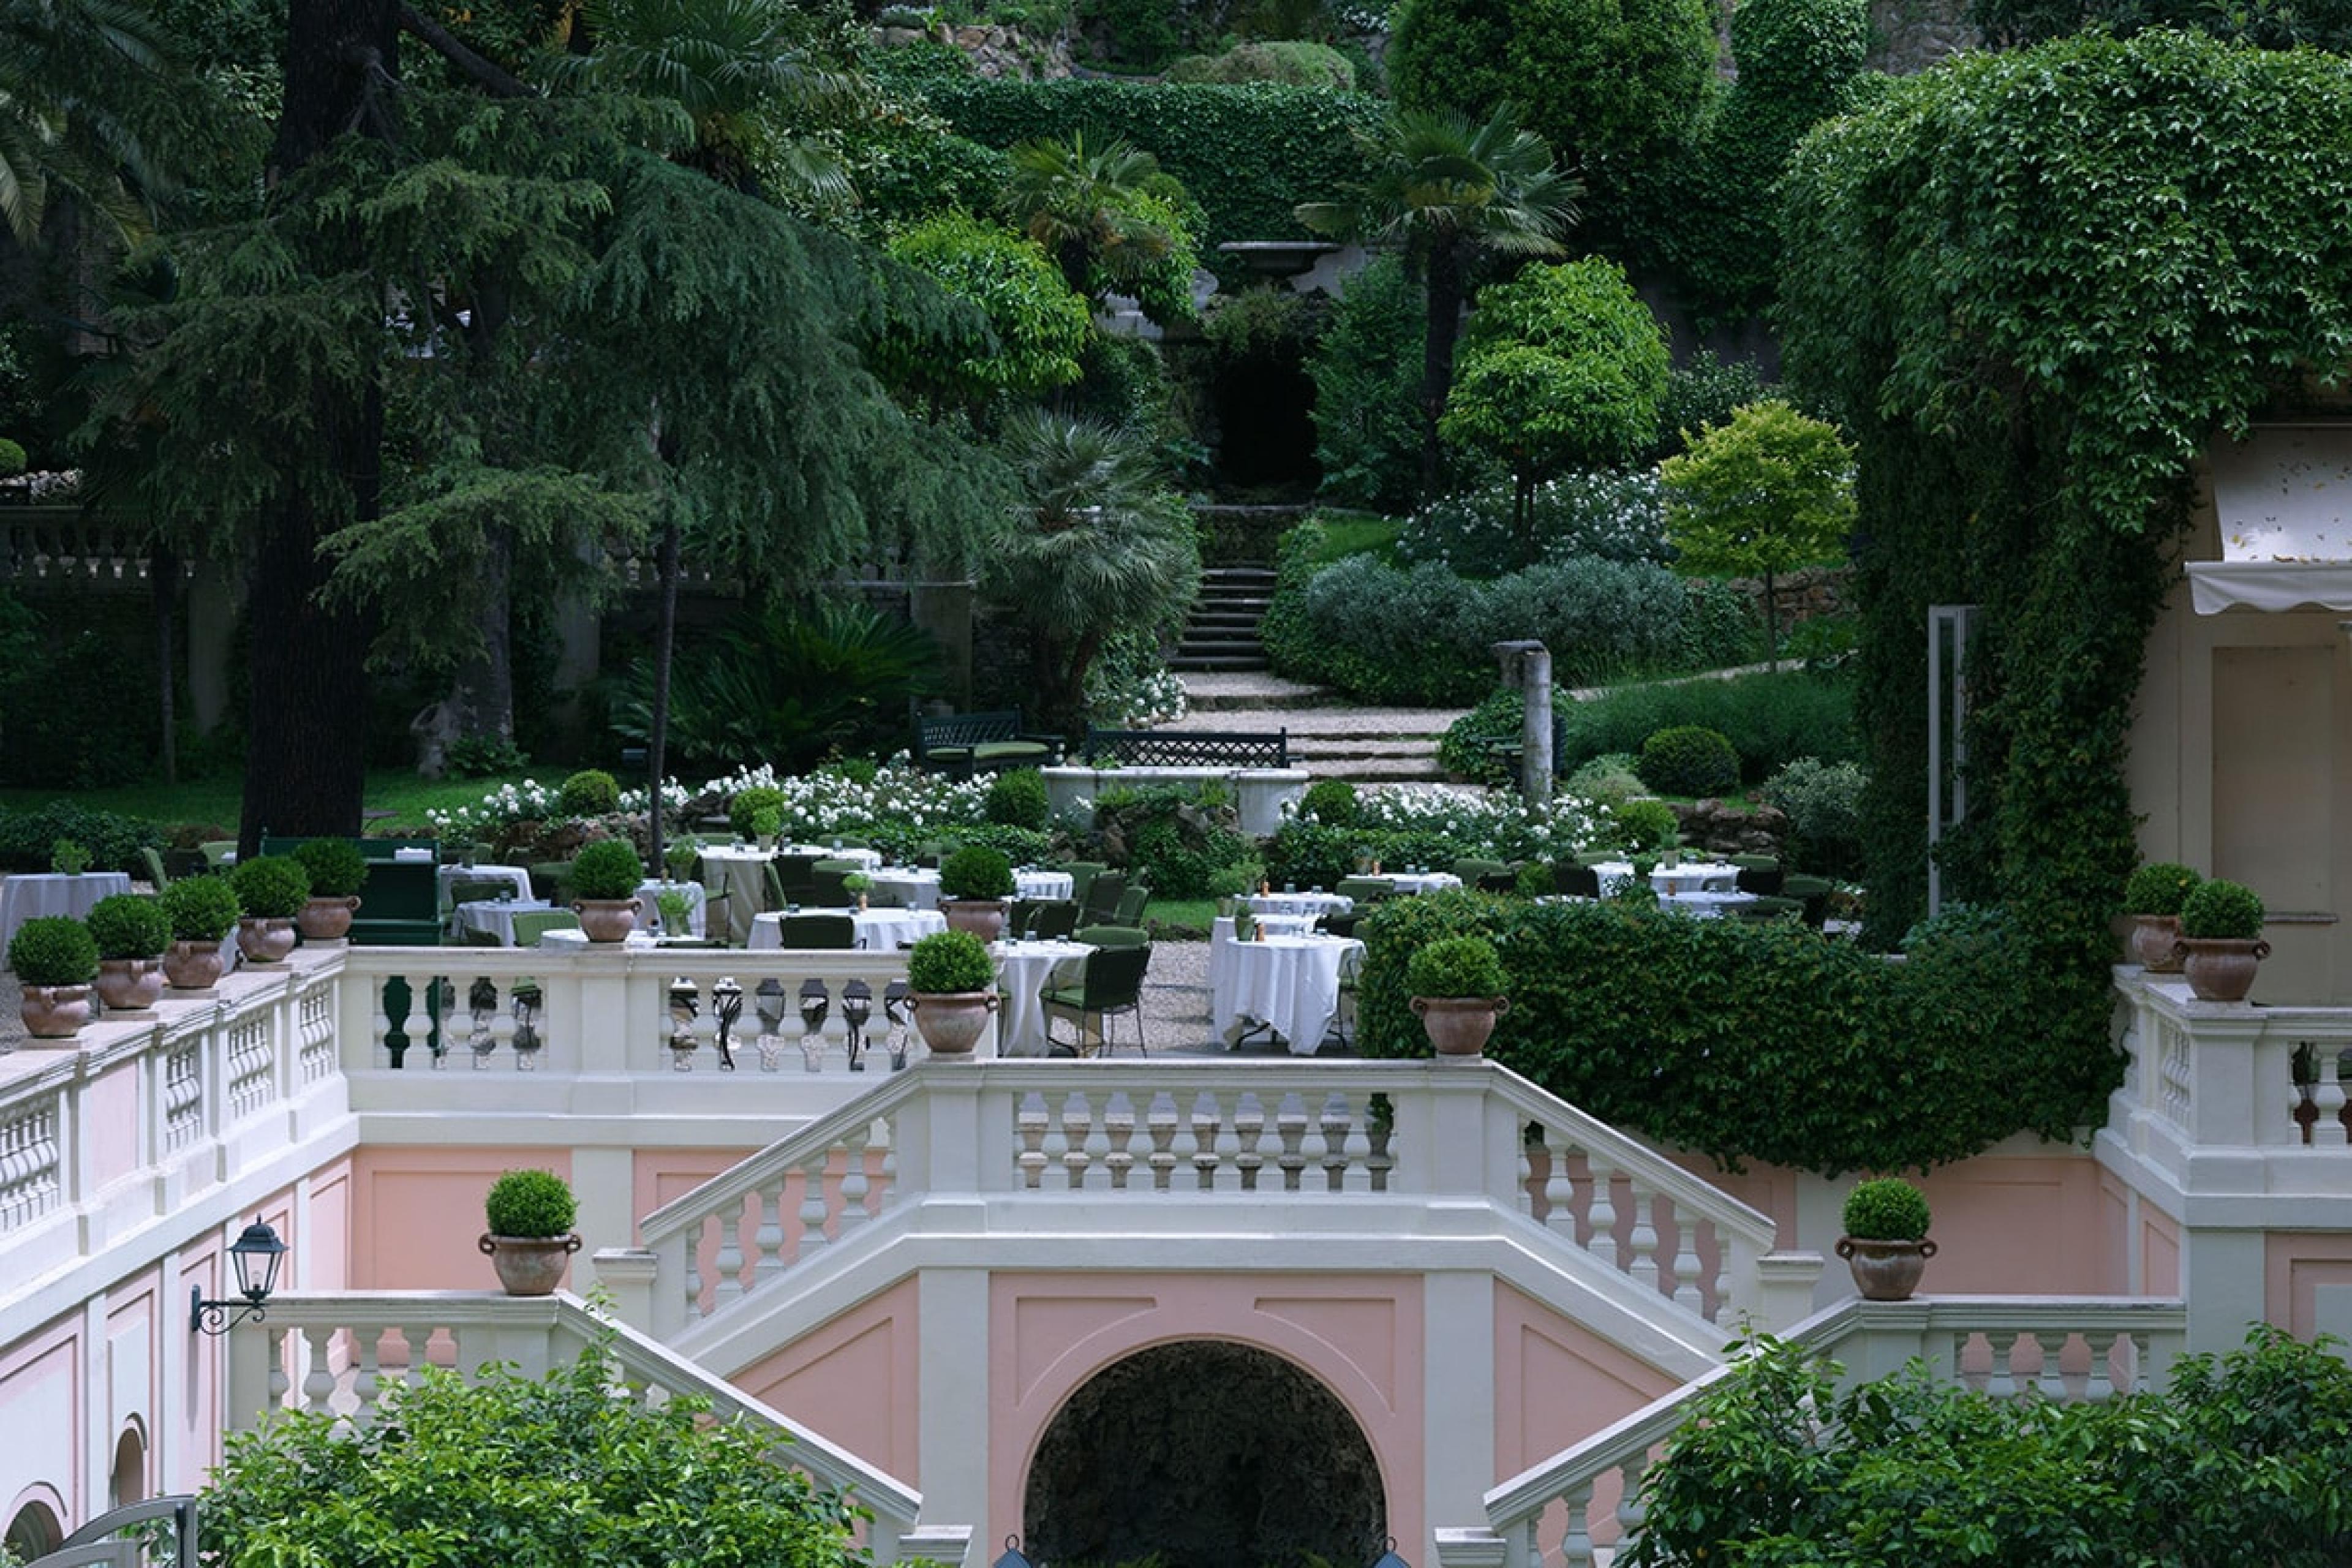 gardens in rome with pink and white grand staircase in center at a hotel